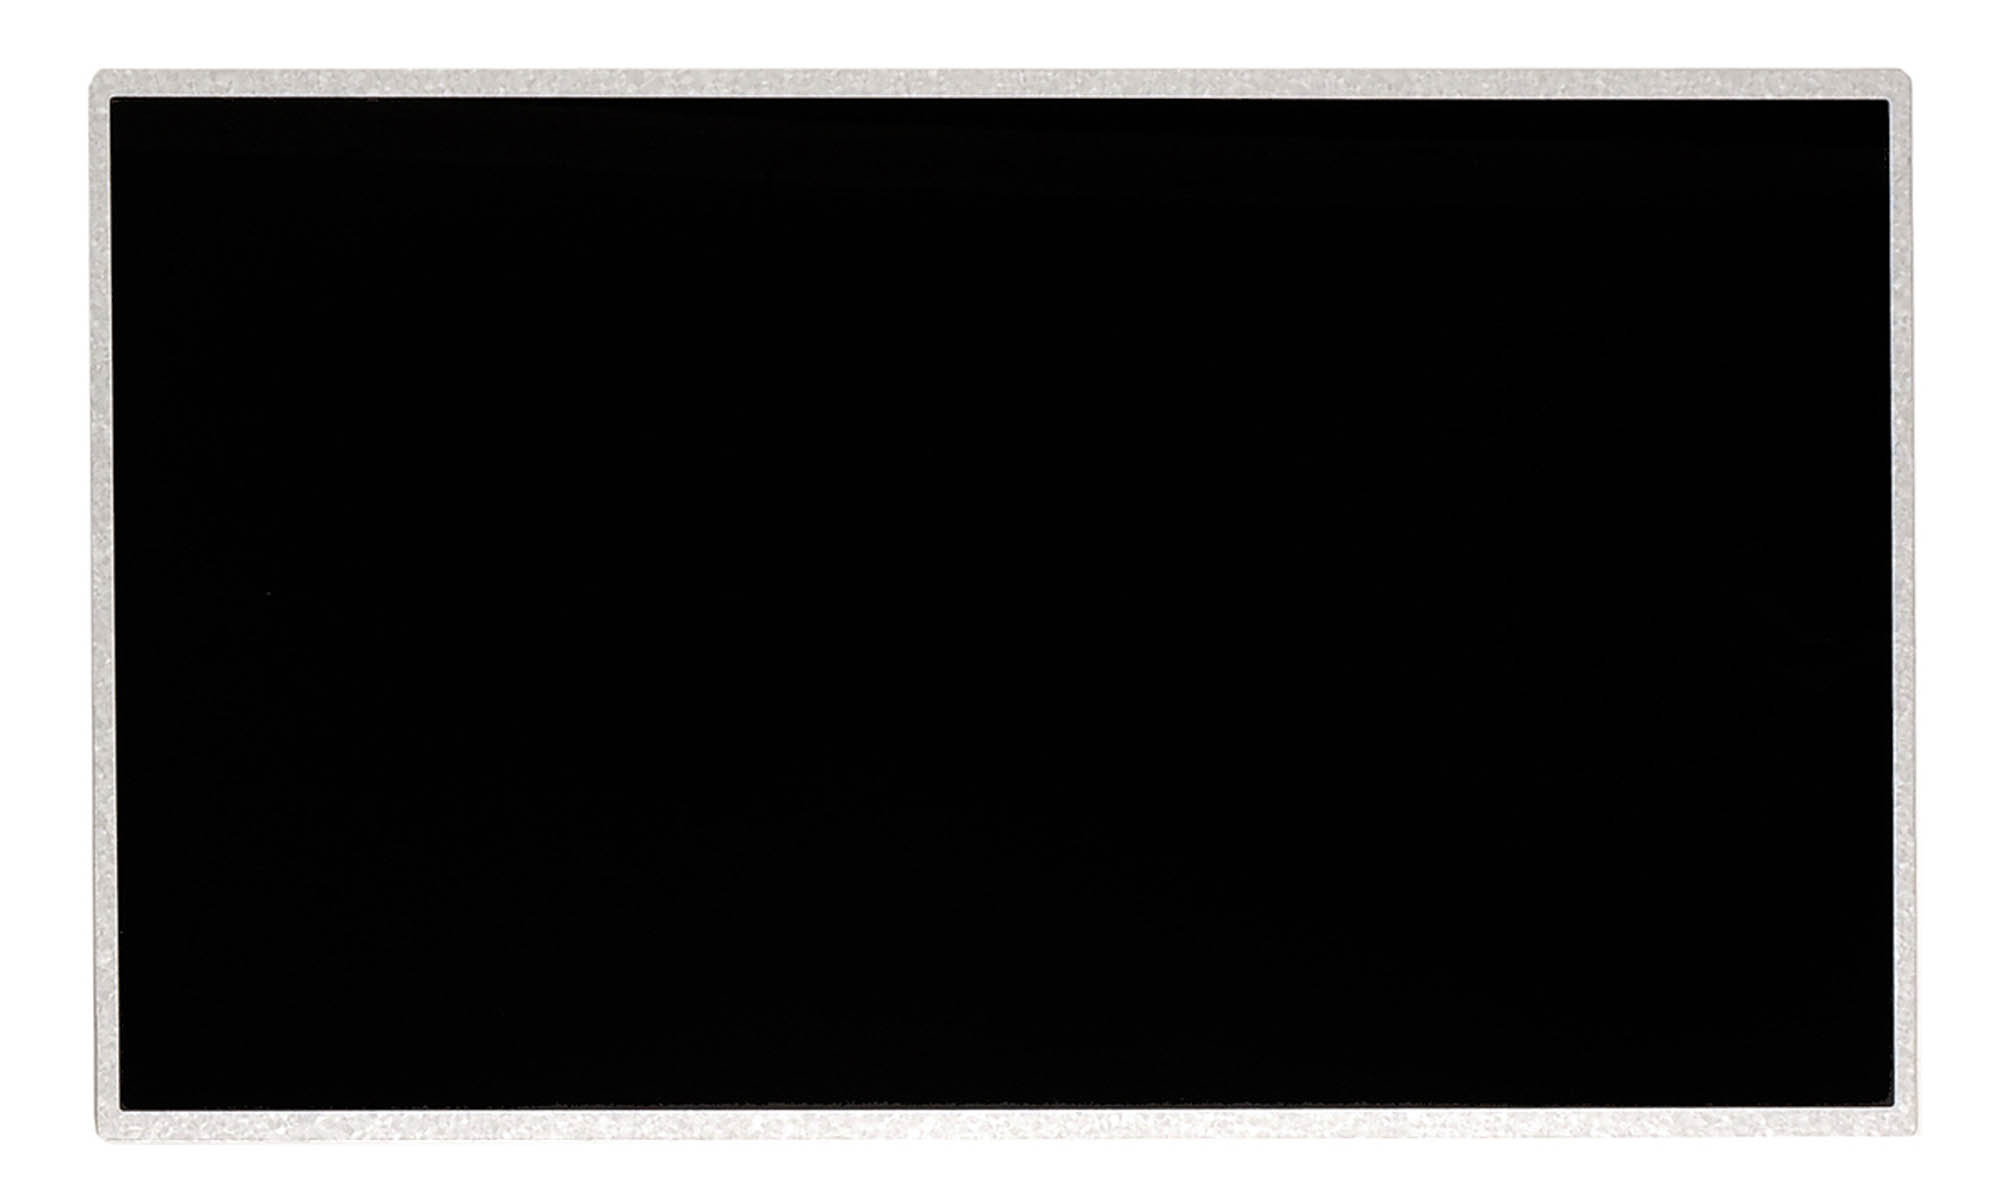 TOSHIBA SATELLITE L855D-S5242 REPLACEMENT LAPTOP 15.6" LCD LED Display Screen